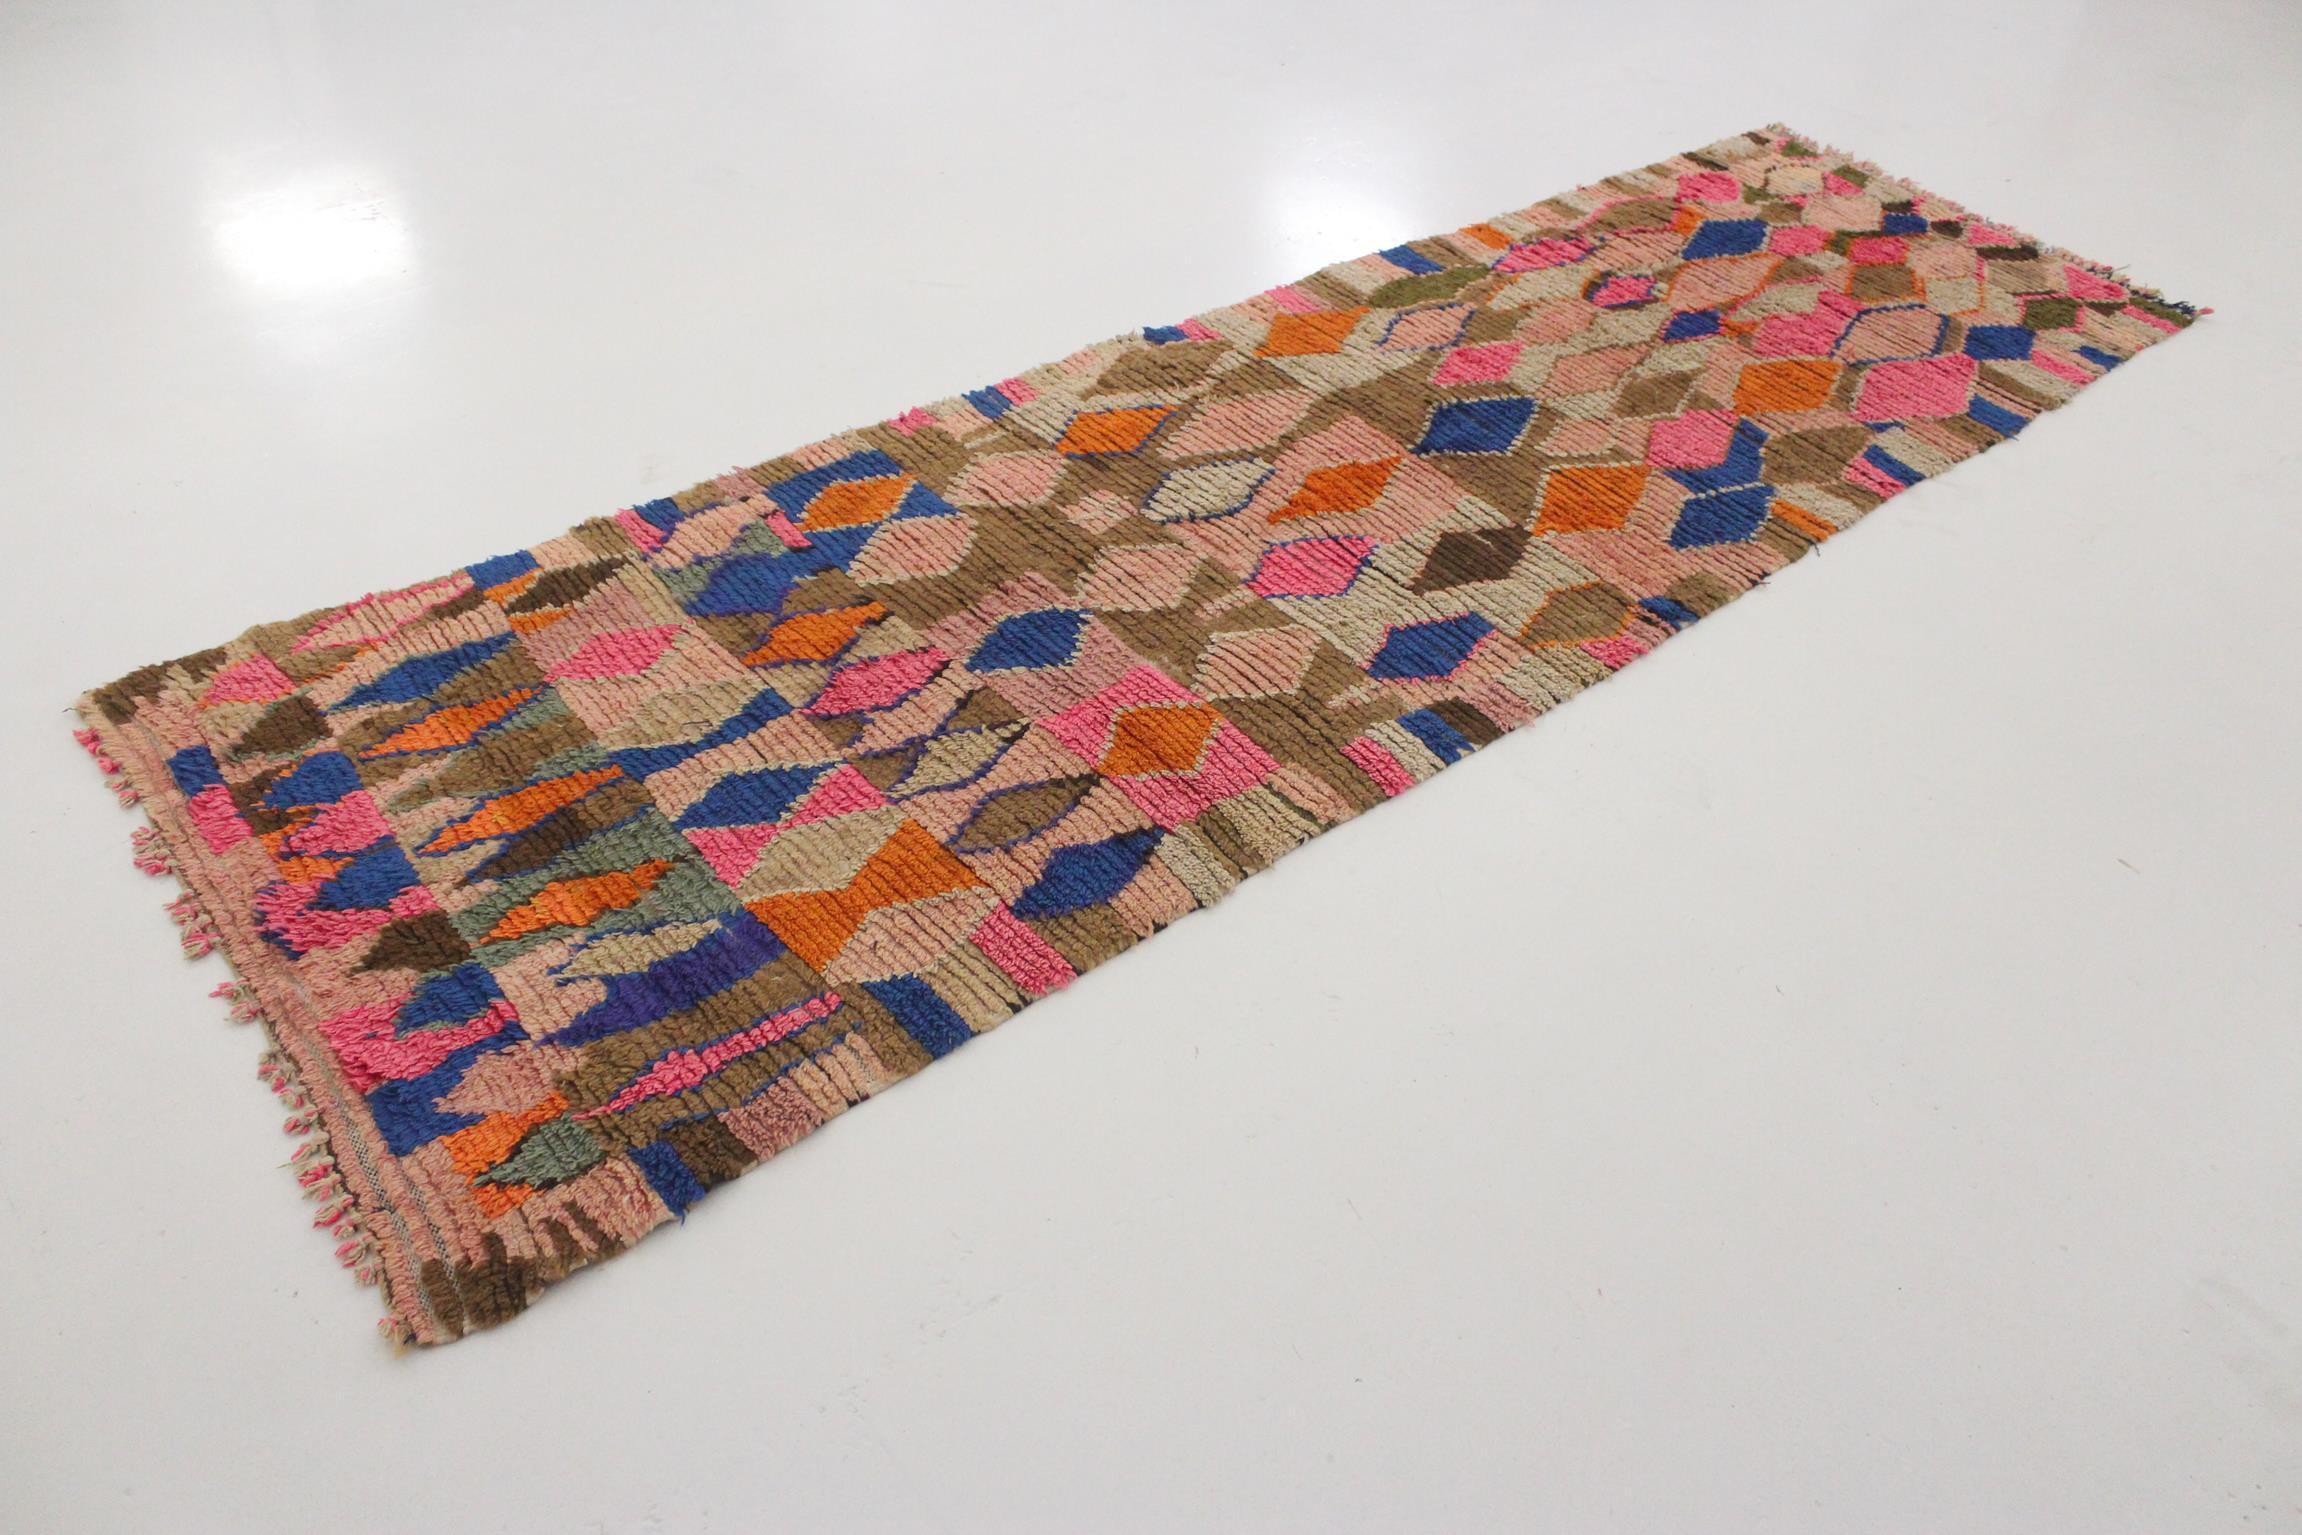 Hand-Woven Vintage Moroccan Boujad runner rug - Pink/brown/blue - 3.2x10feet / 97x307cm For Sale